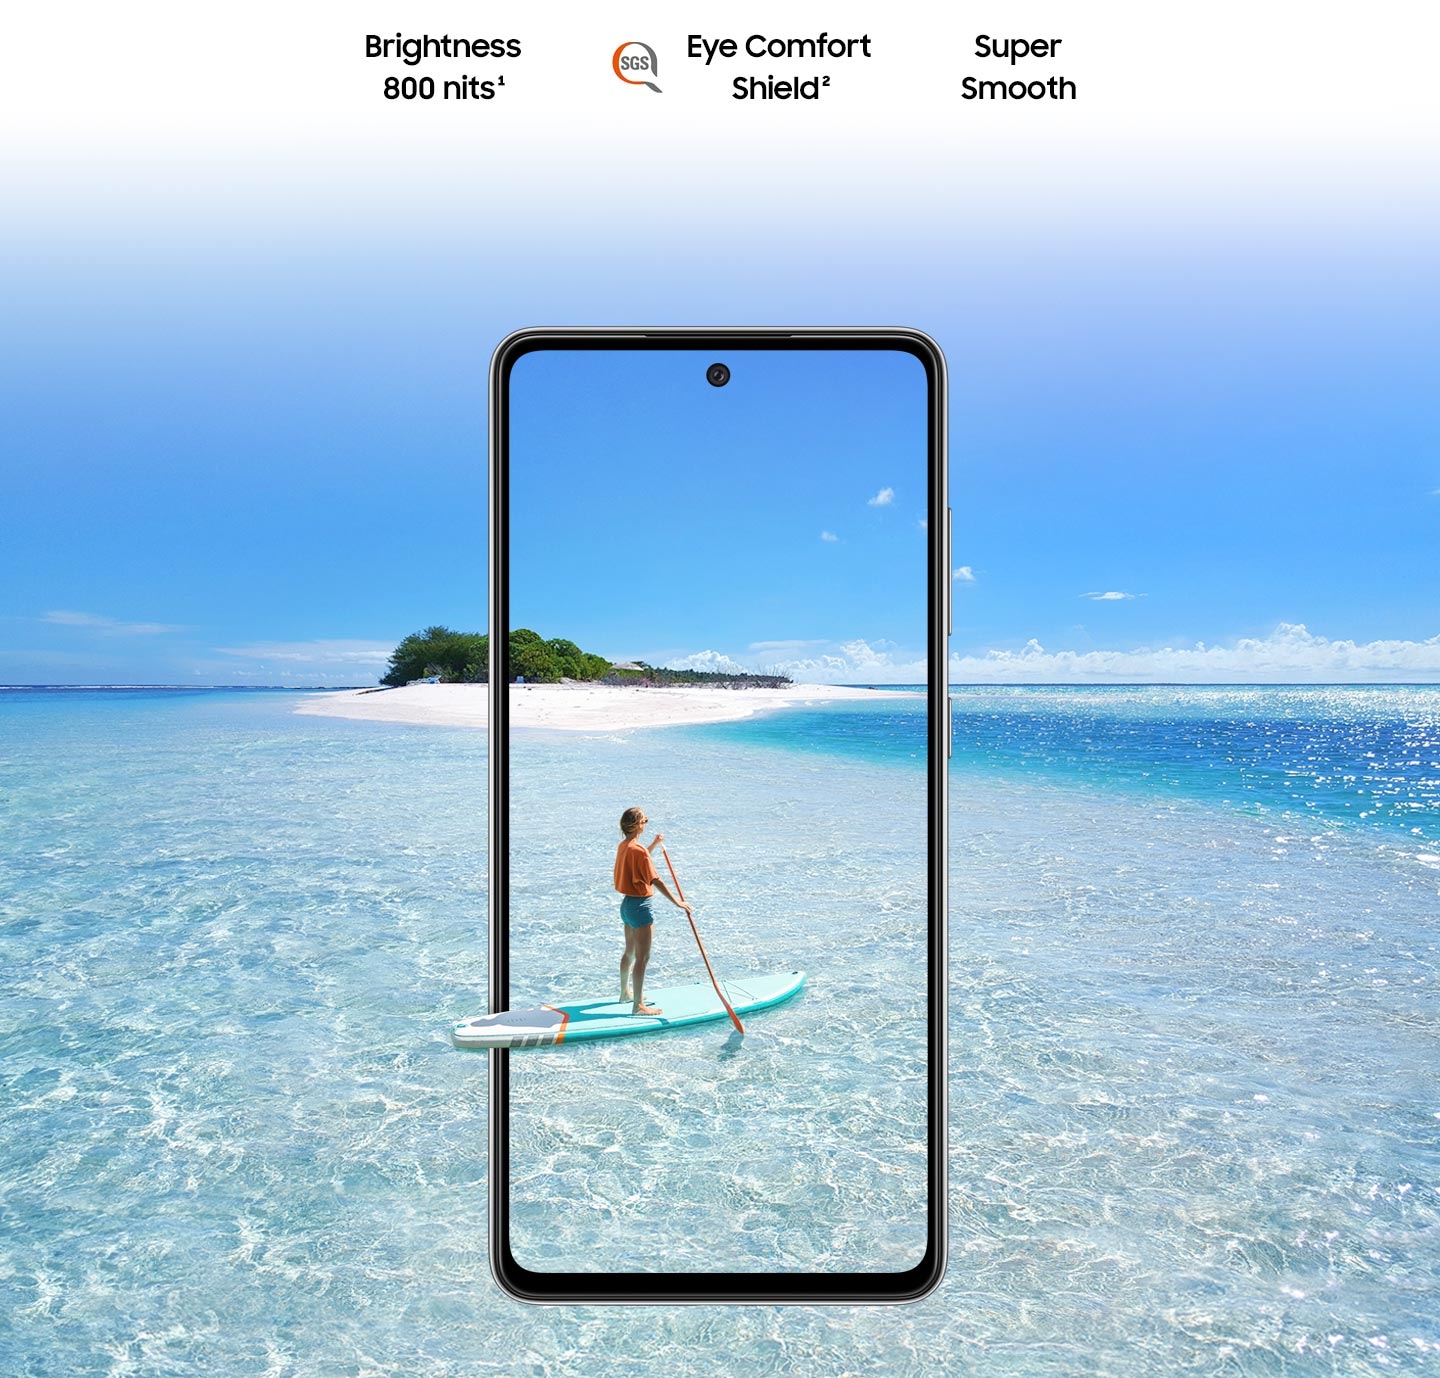 Galaxy A52s 5G seen from the front. Behind the phone and inside the display is a scene of a body of water and a small island. On the phone's screen is a person paddleboarding, and their paddleboard extends slightly outside the boundaries of the phone to represent the screen's immersive view. Text says Super Smooth, Brightness 800 nits and Eye Comfort Shield, with the SGS logo.